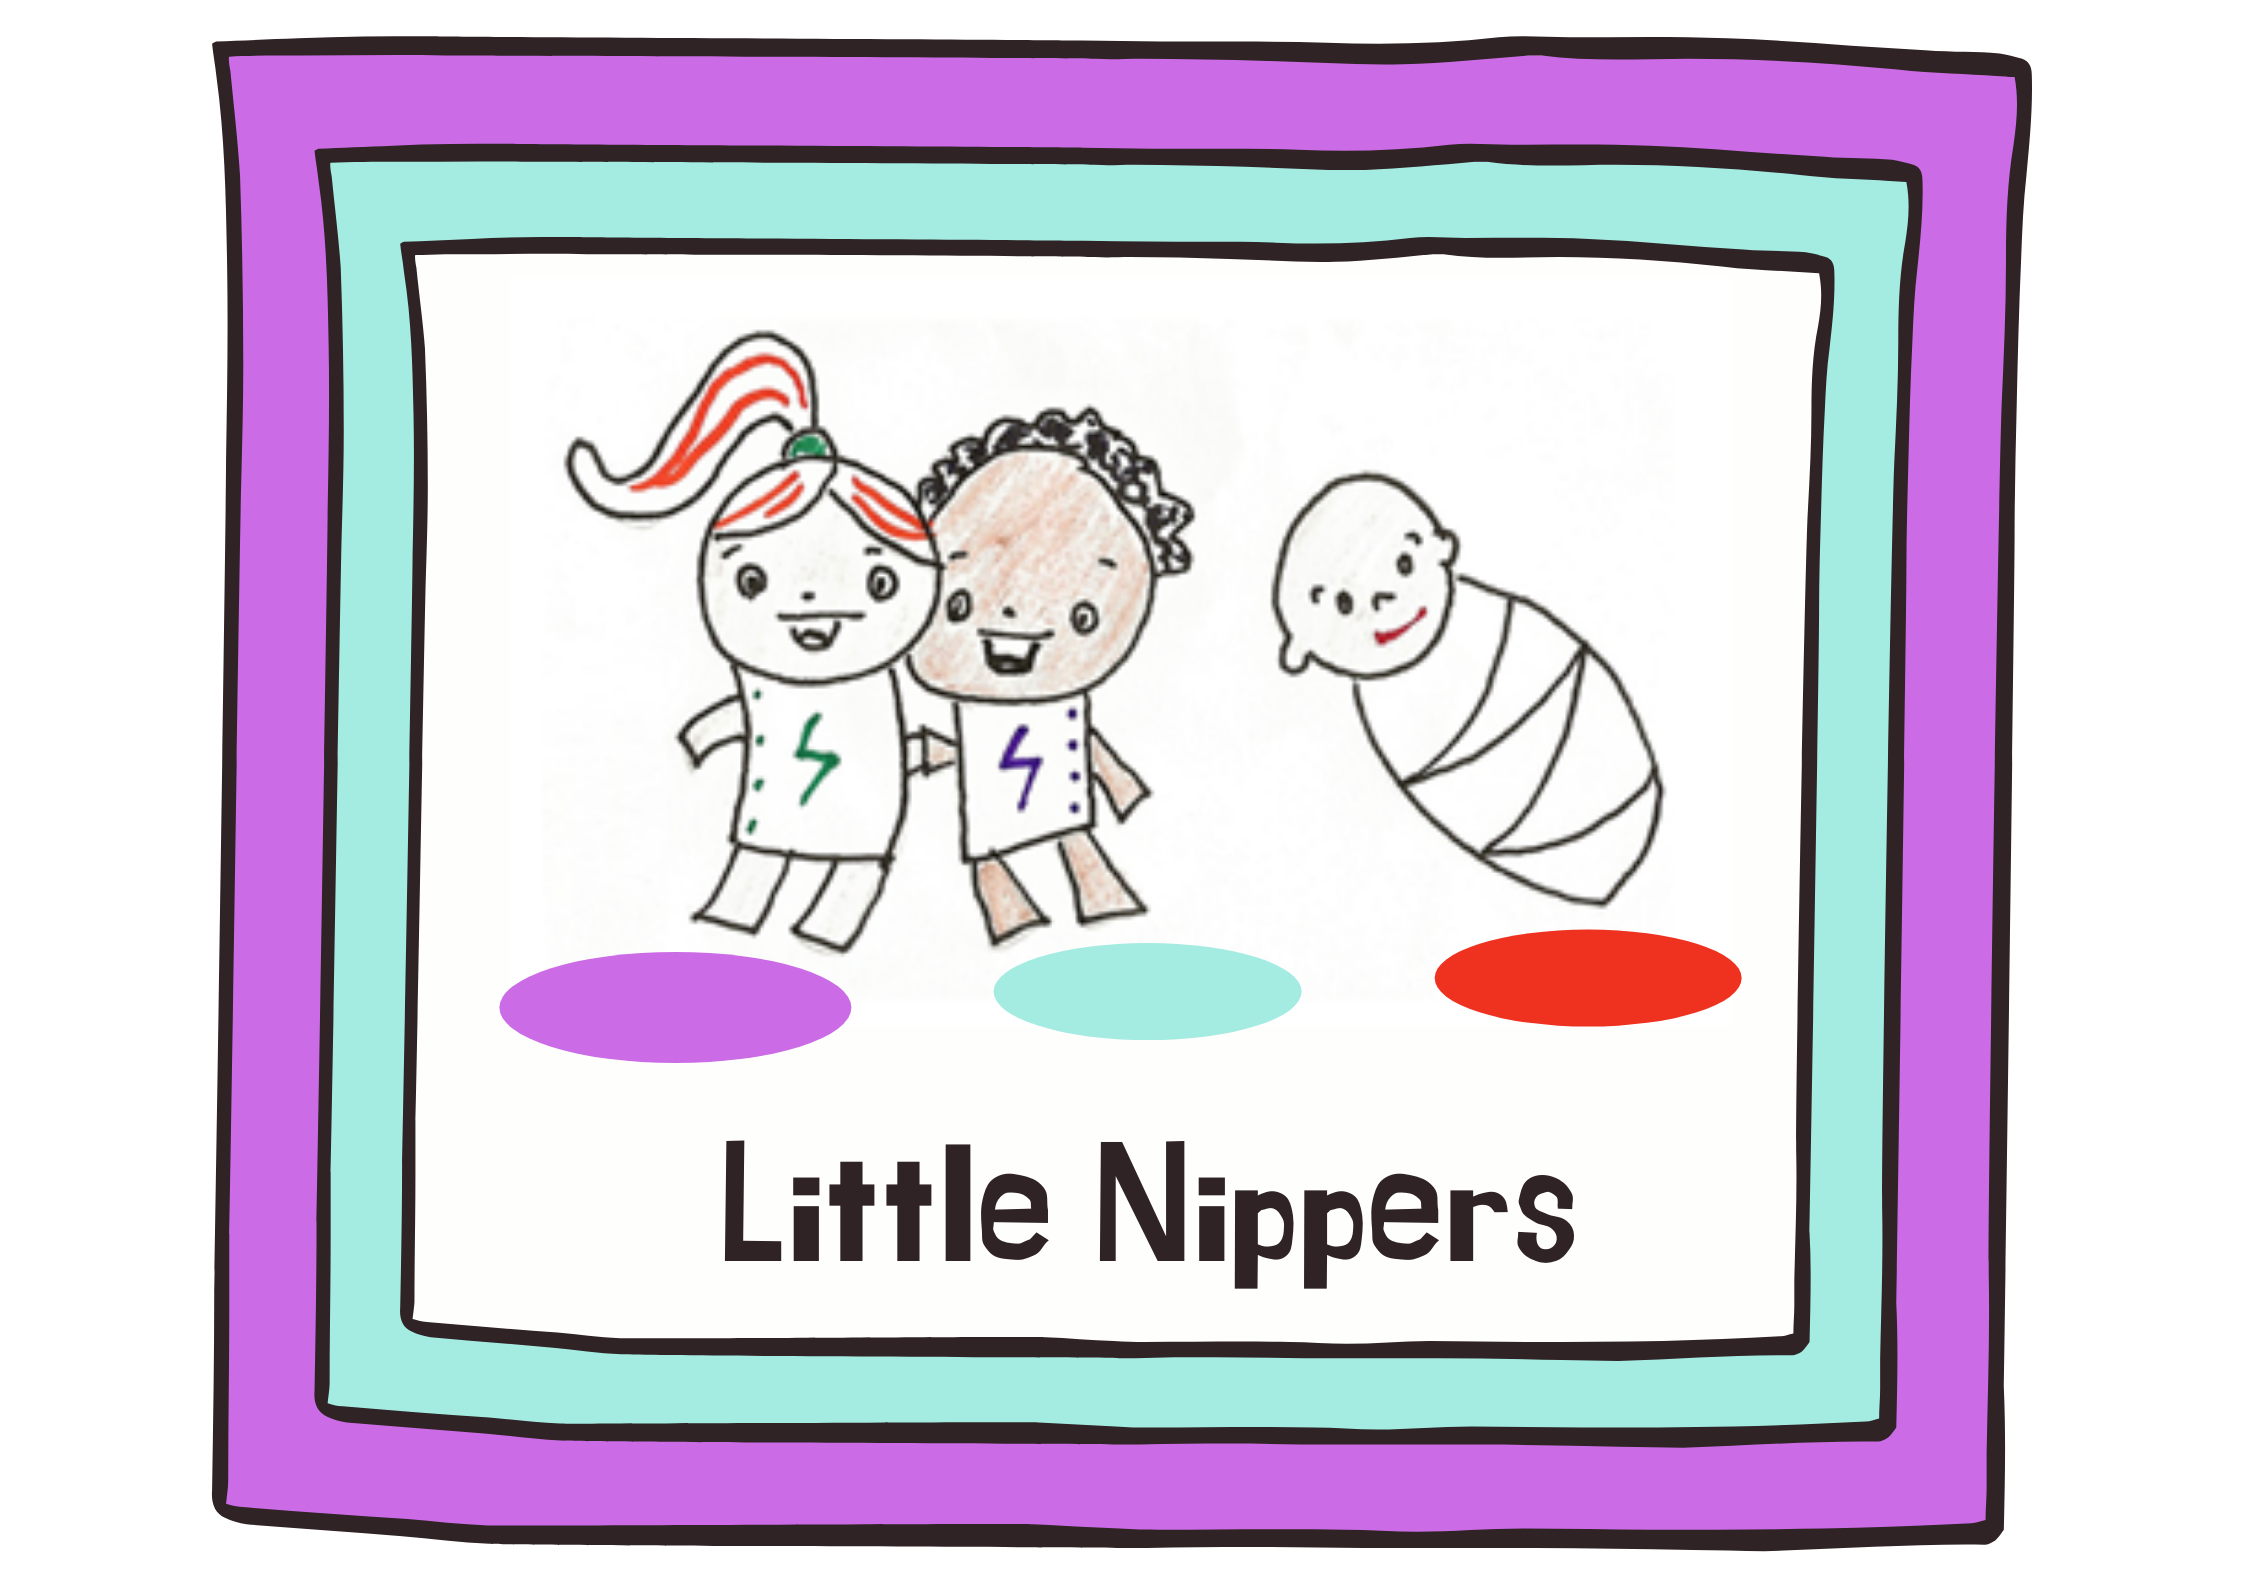 Little Nippers is back!